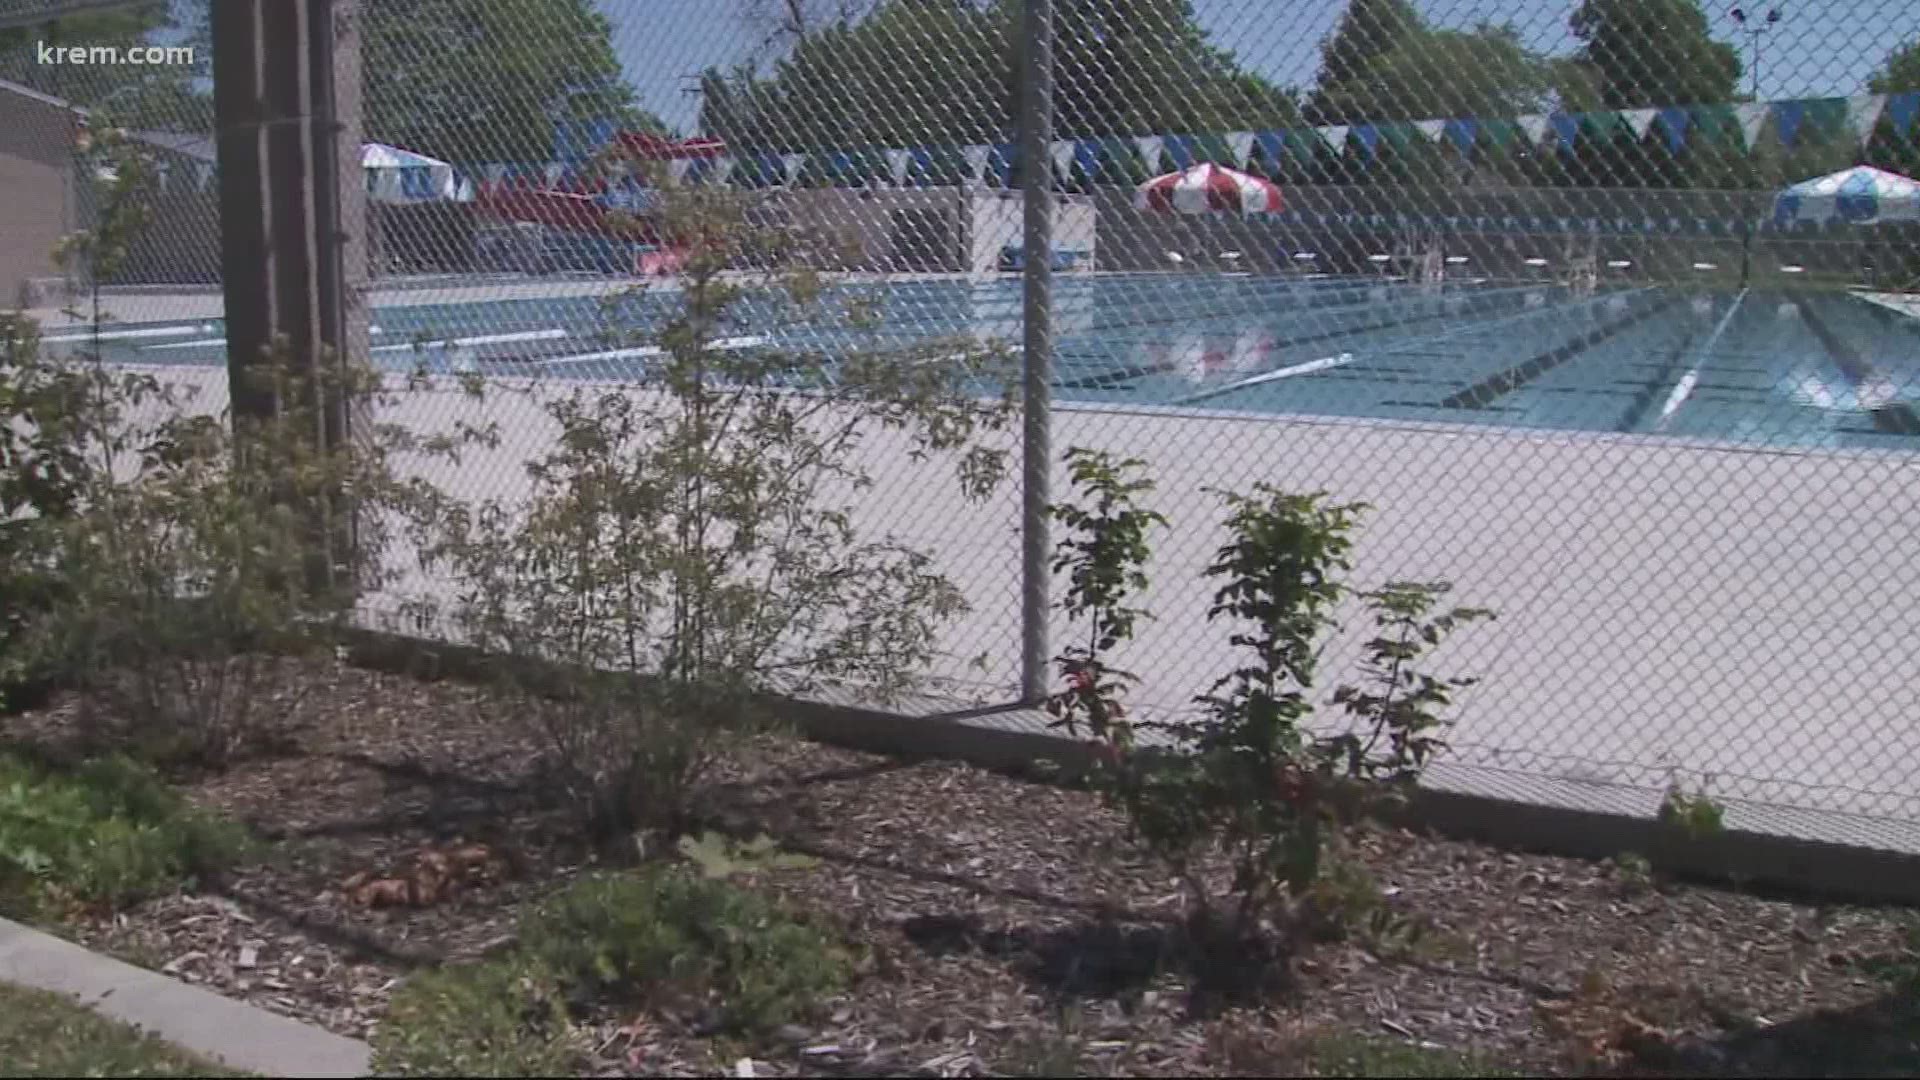 The pools open for public swim on June 28.